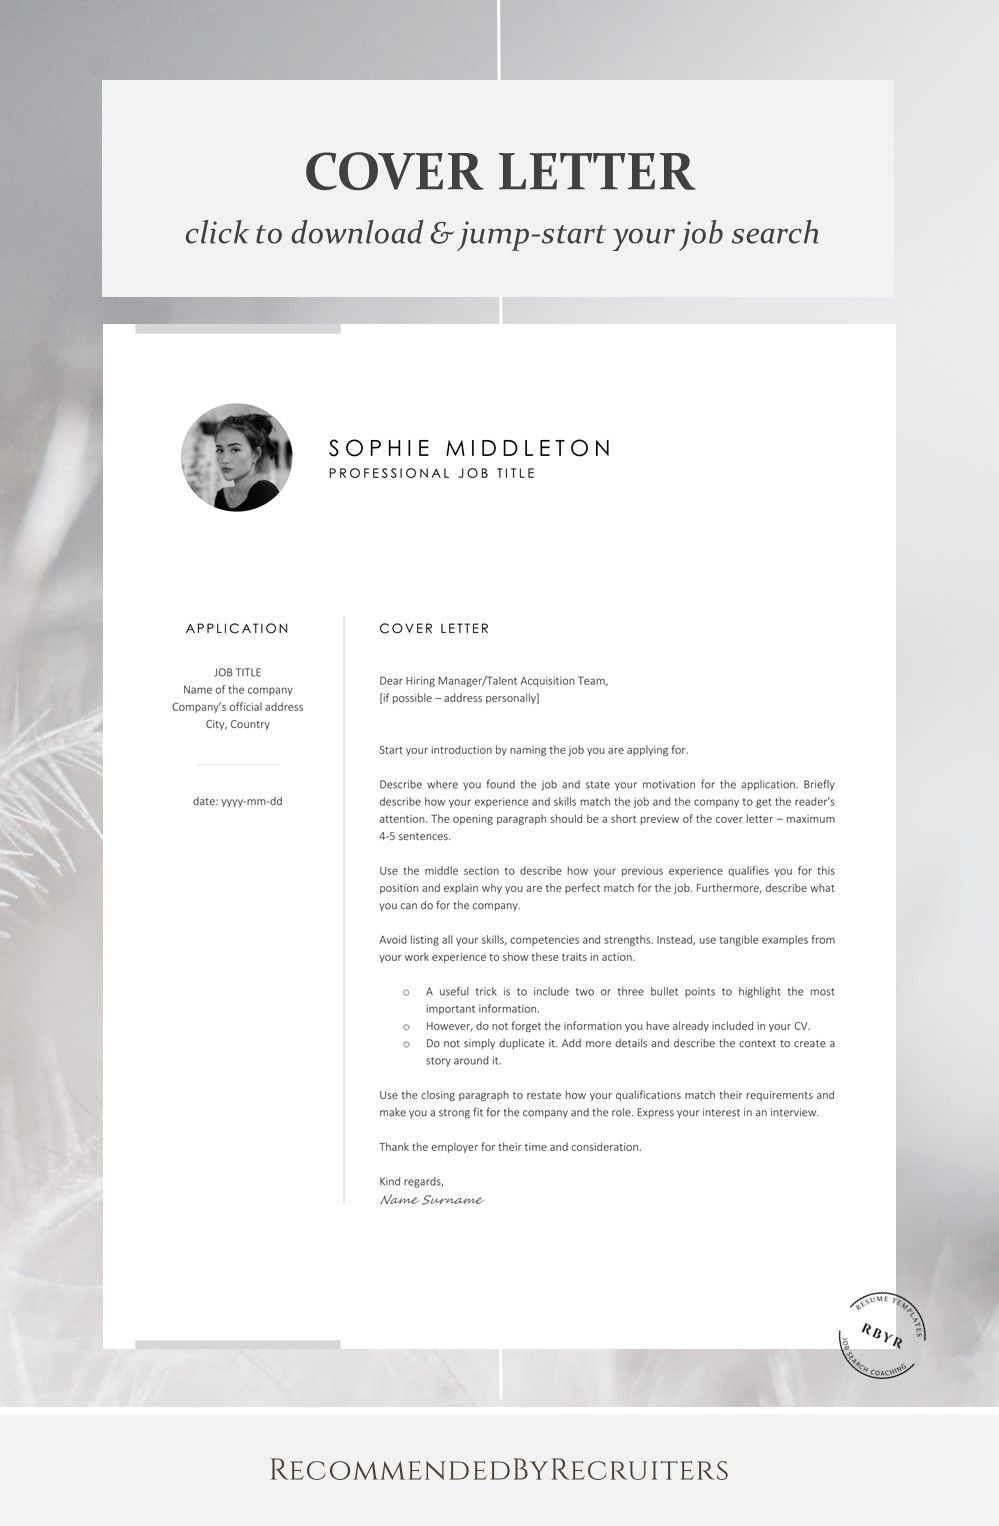 Resume and Cover Letter Template Download Download Cover Letter Template with Photo, Modern, sophisticated …